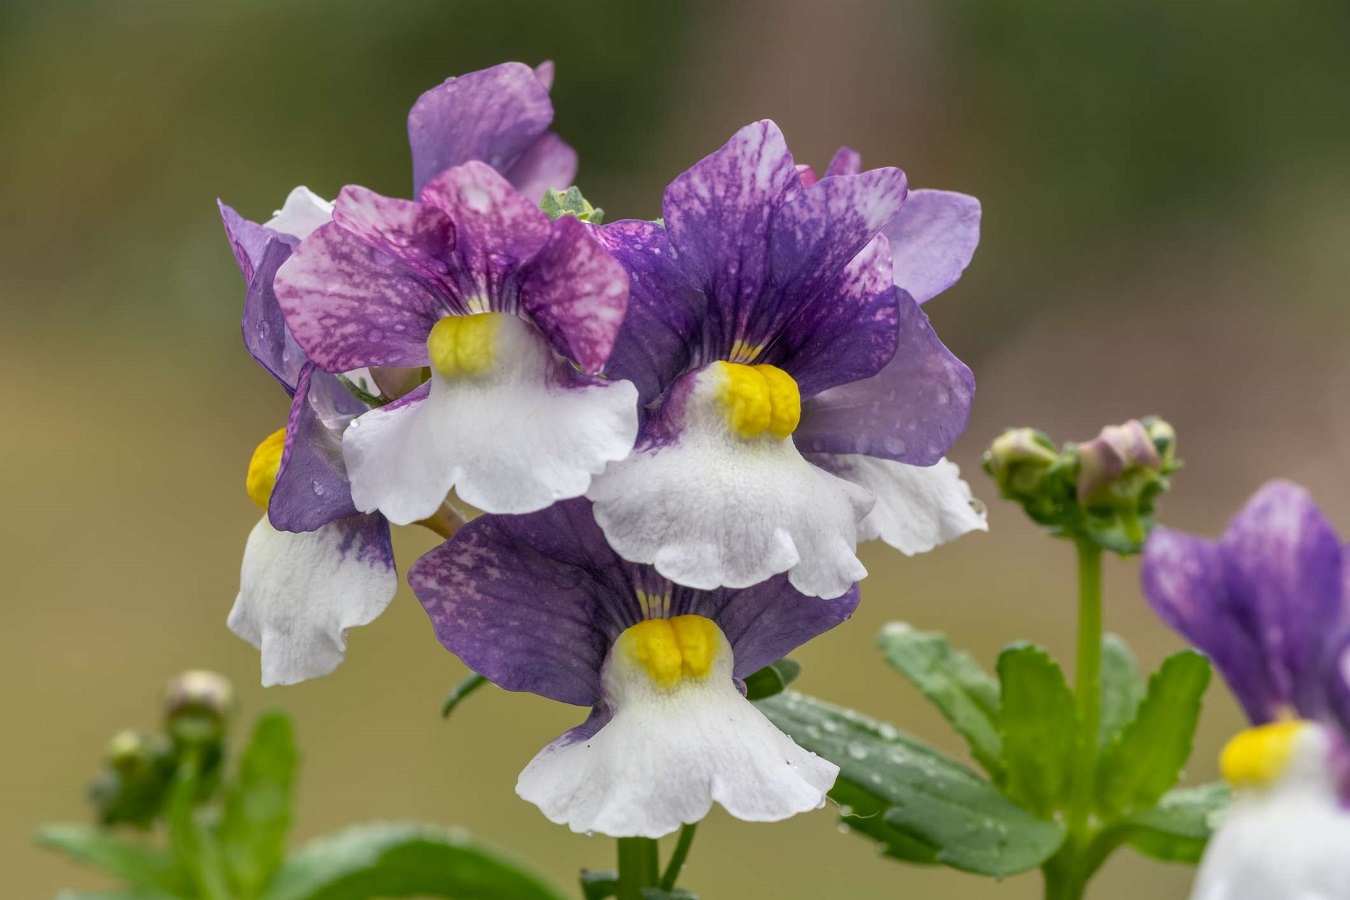 Nemesia Care Guide - Varieties, Seeds, Pests, Diseases and Needs